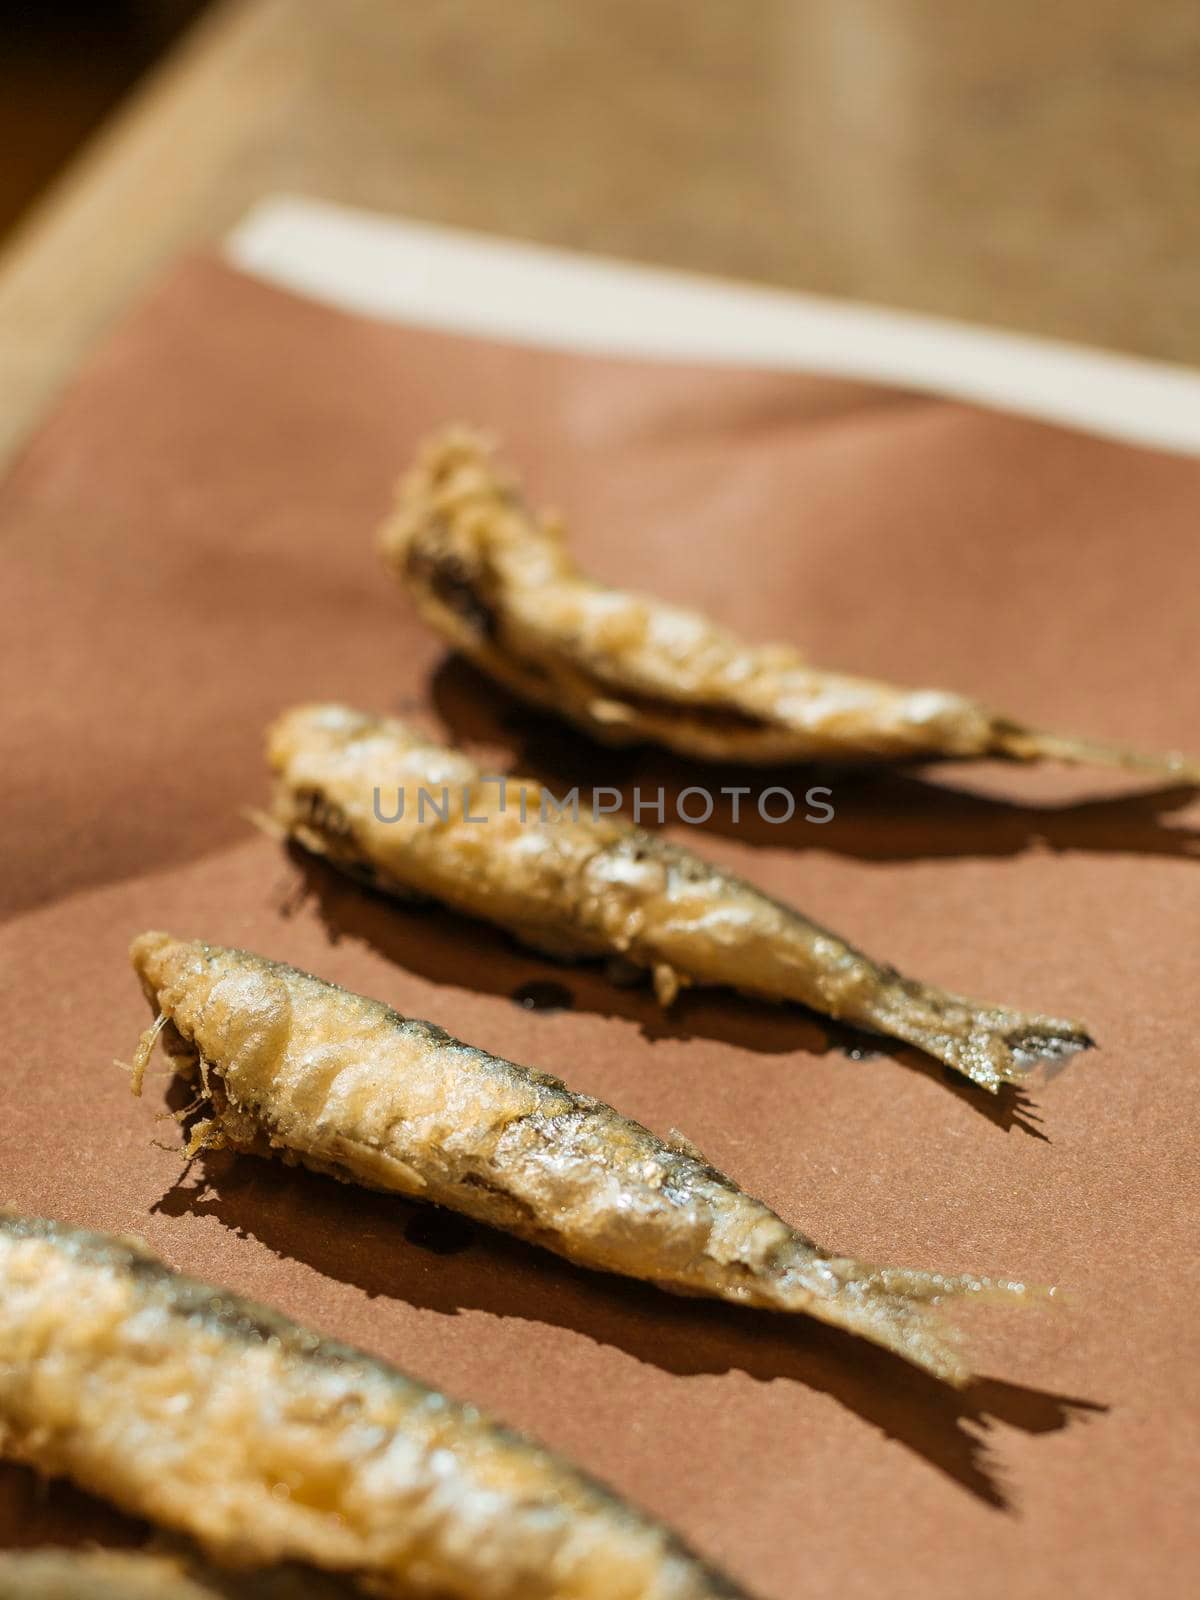 Venetian pilchard (Sardina Pilchardus), tipically served fried or used for Sardines in Saor, a recipe with onions cooked in vinegar, raisins and pine nuts